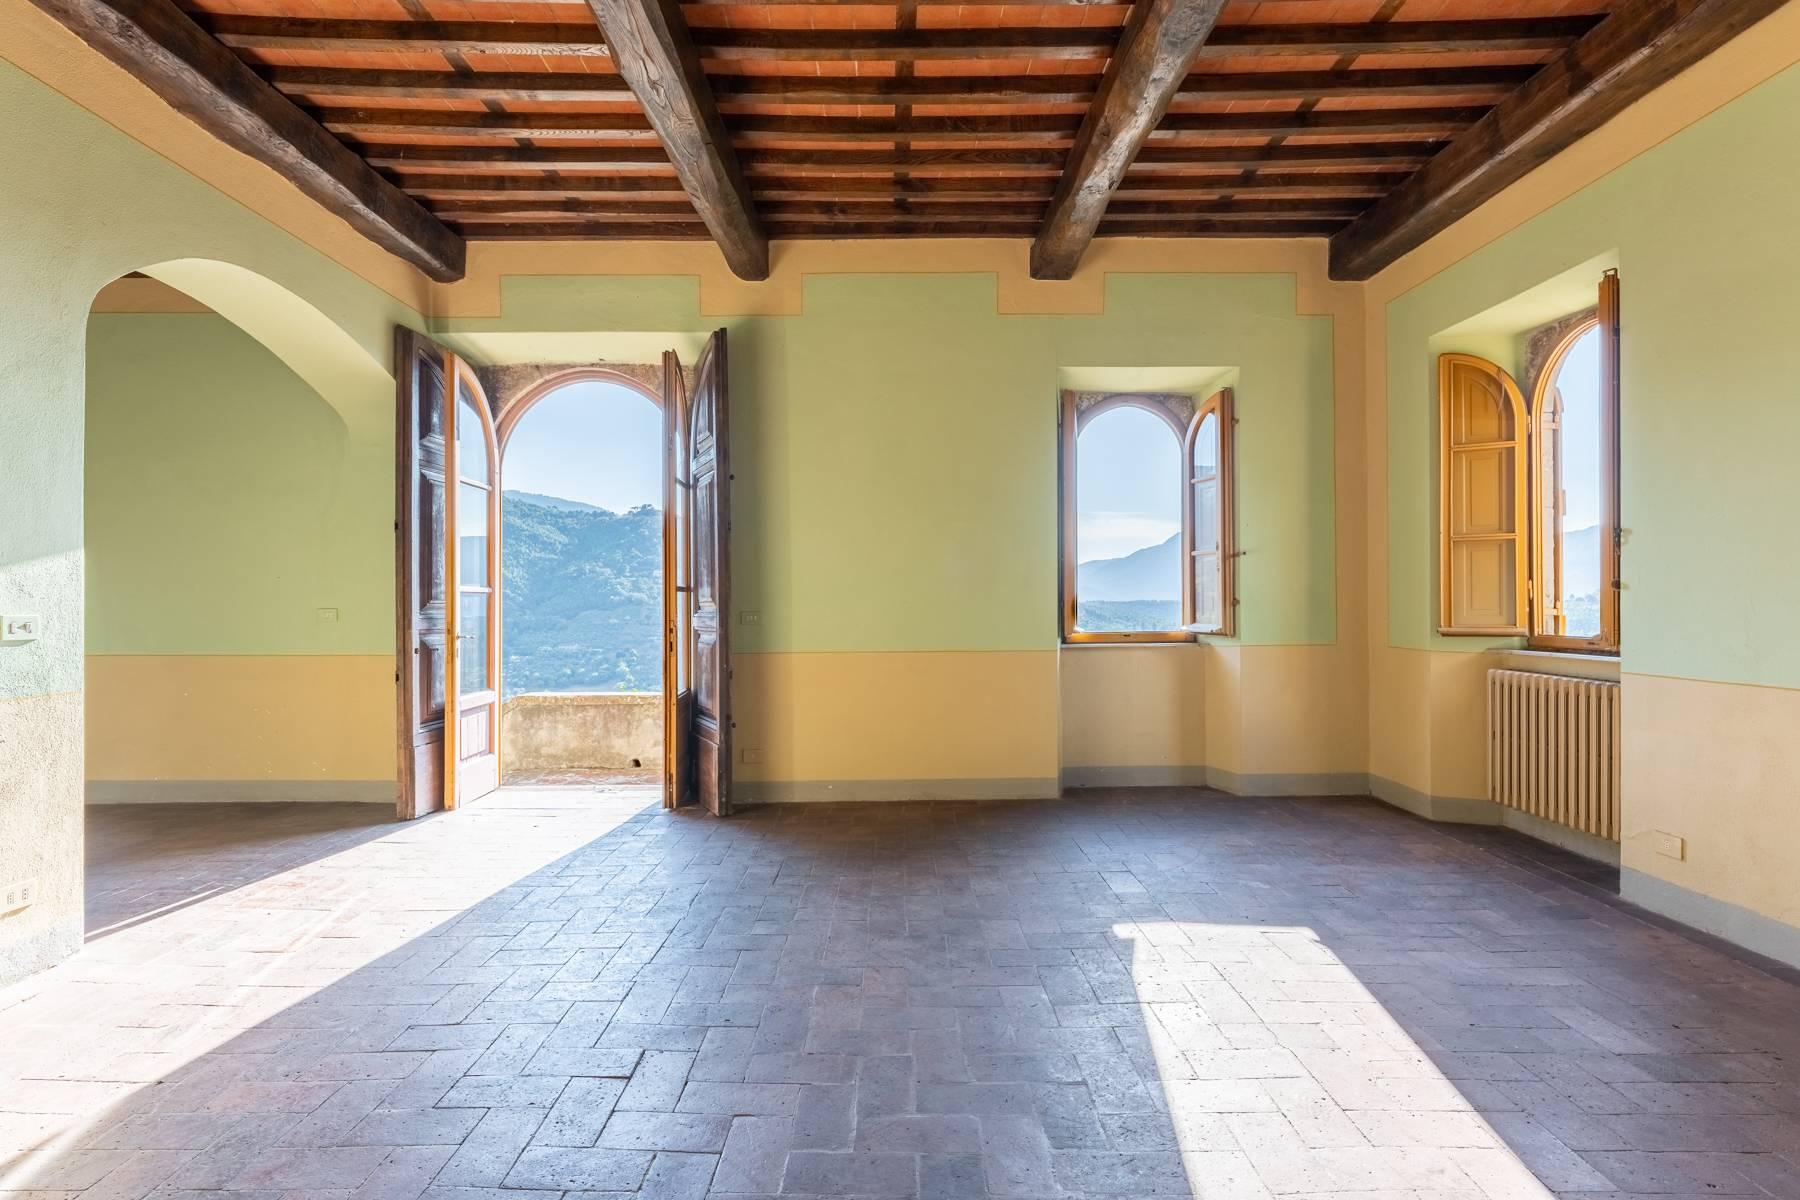 Superb villa with breathtaking views of the Lucca countryside - 15